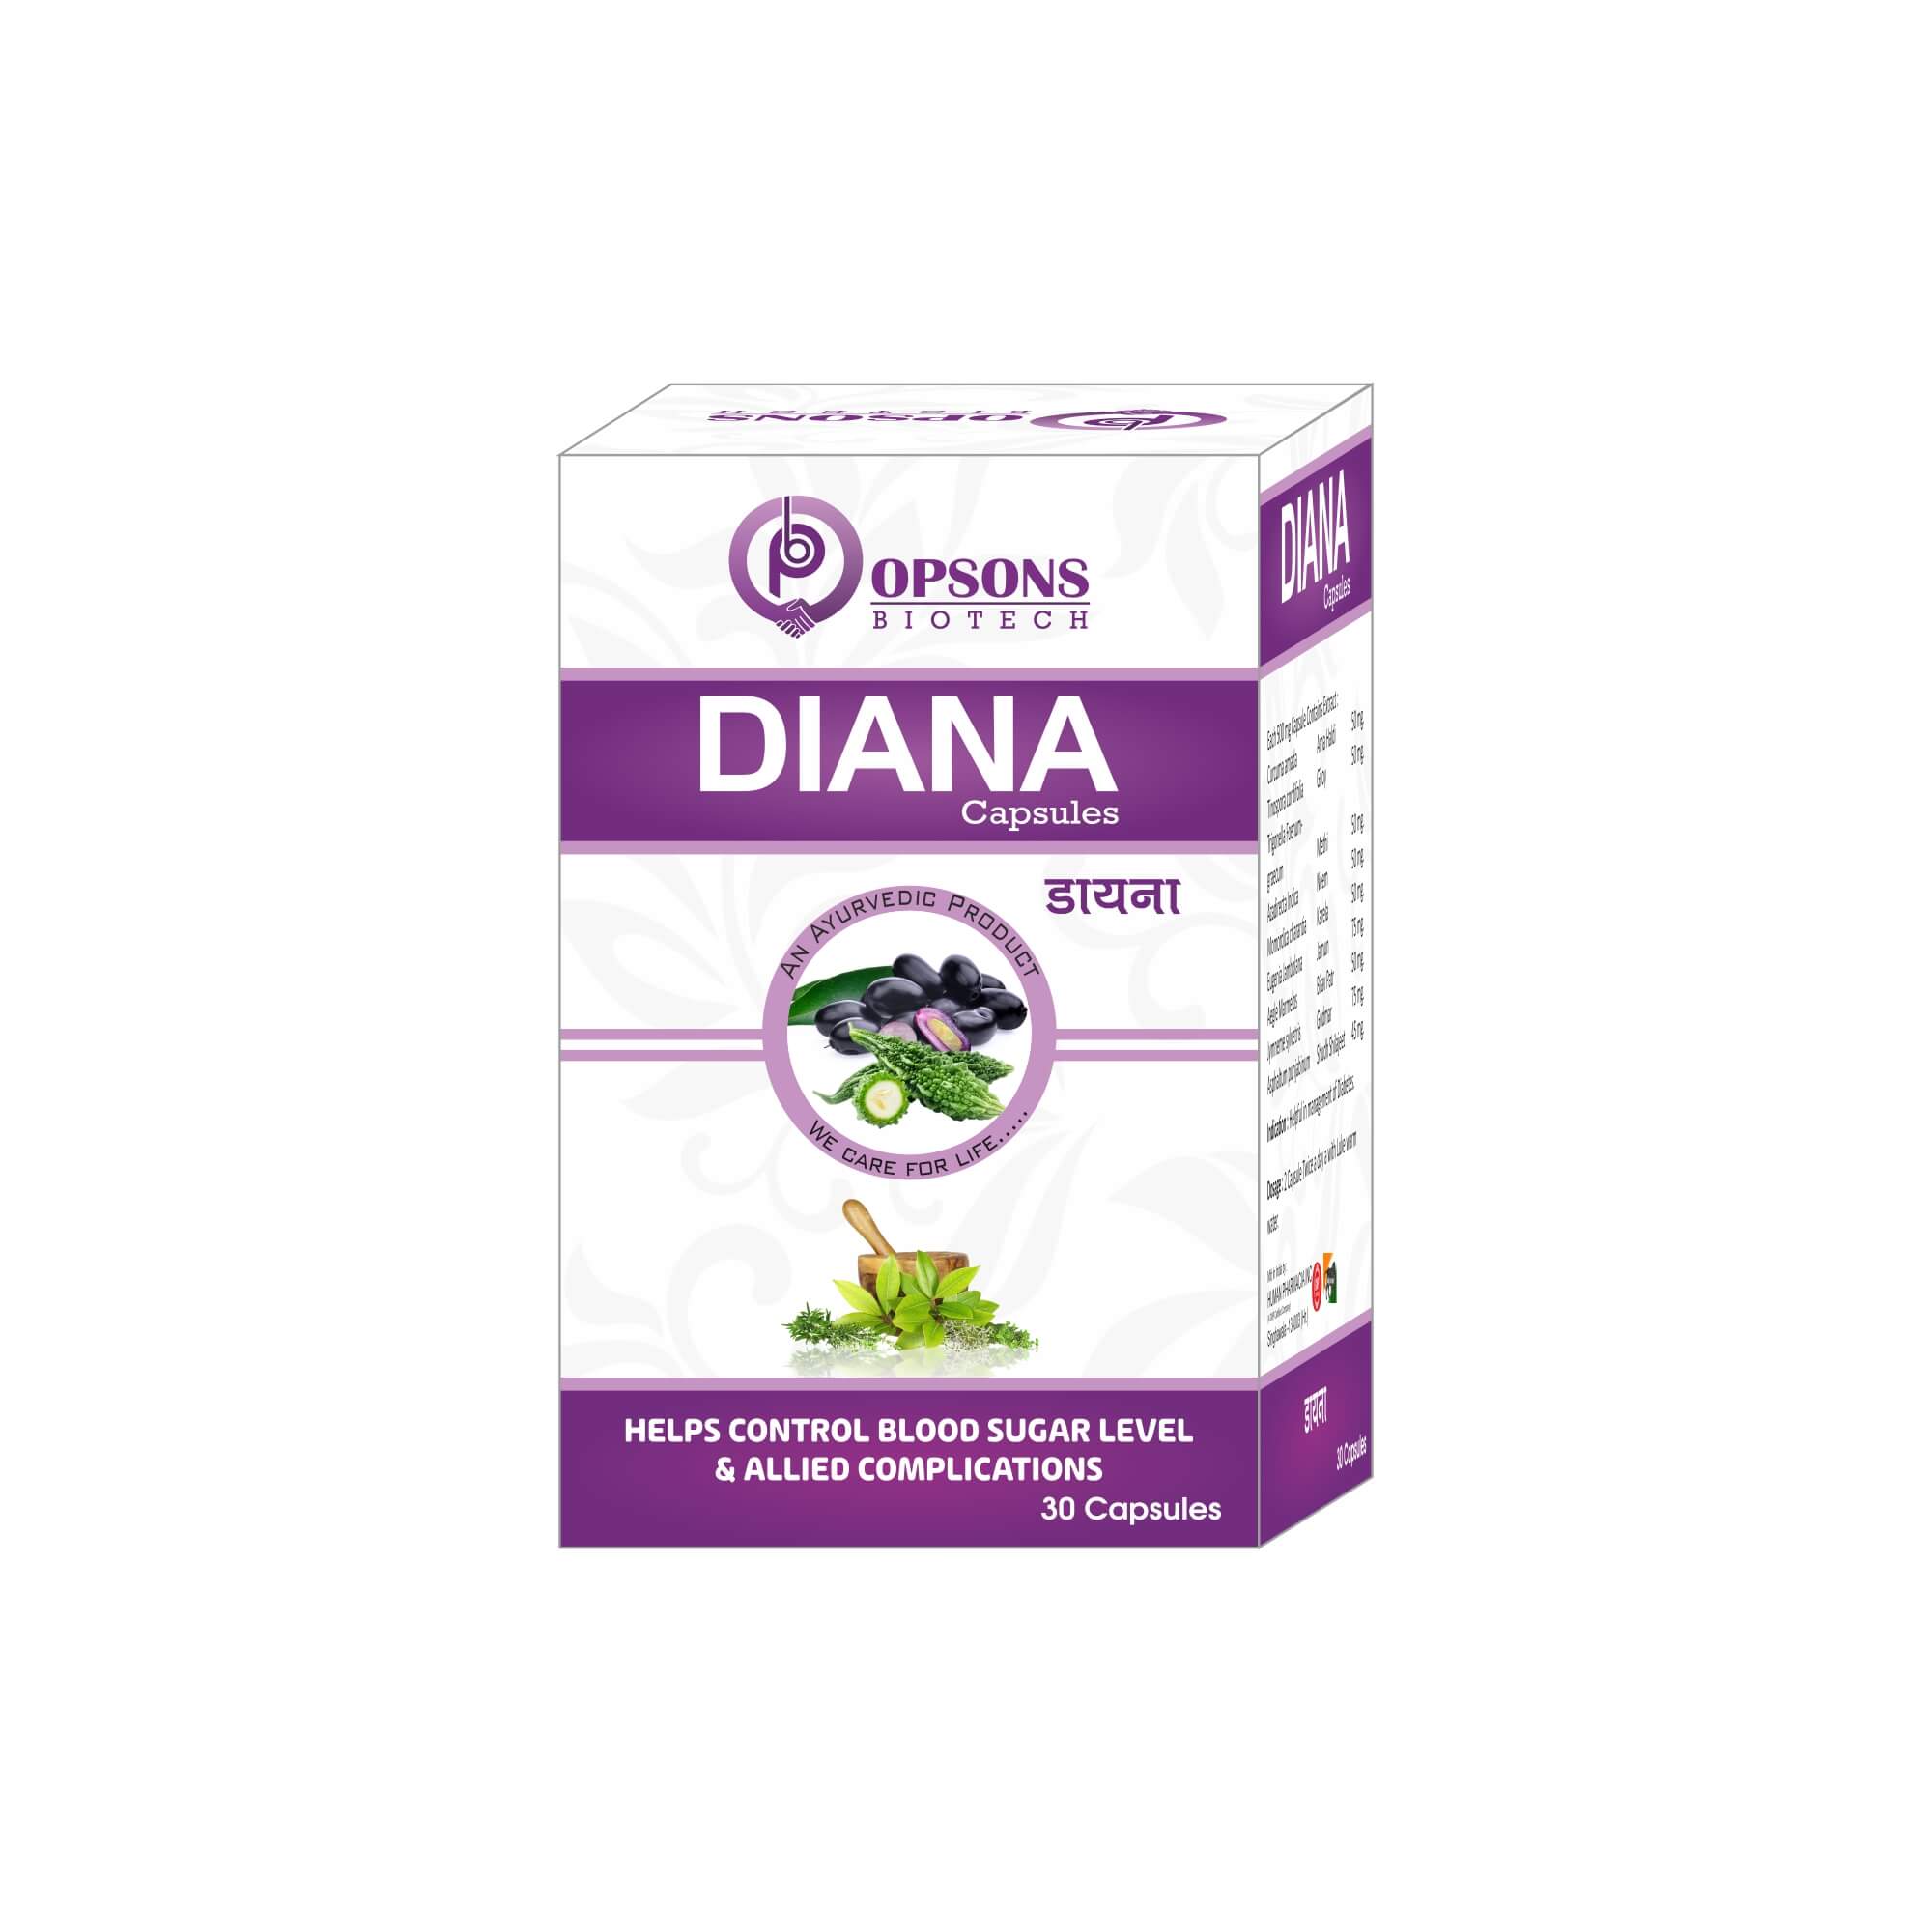 Product Name: DIANA, Compositions of DIANA are Helps Control Blood Sugar Level & Allied Complications - Opsons Biotech